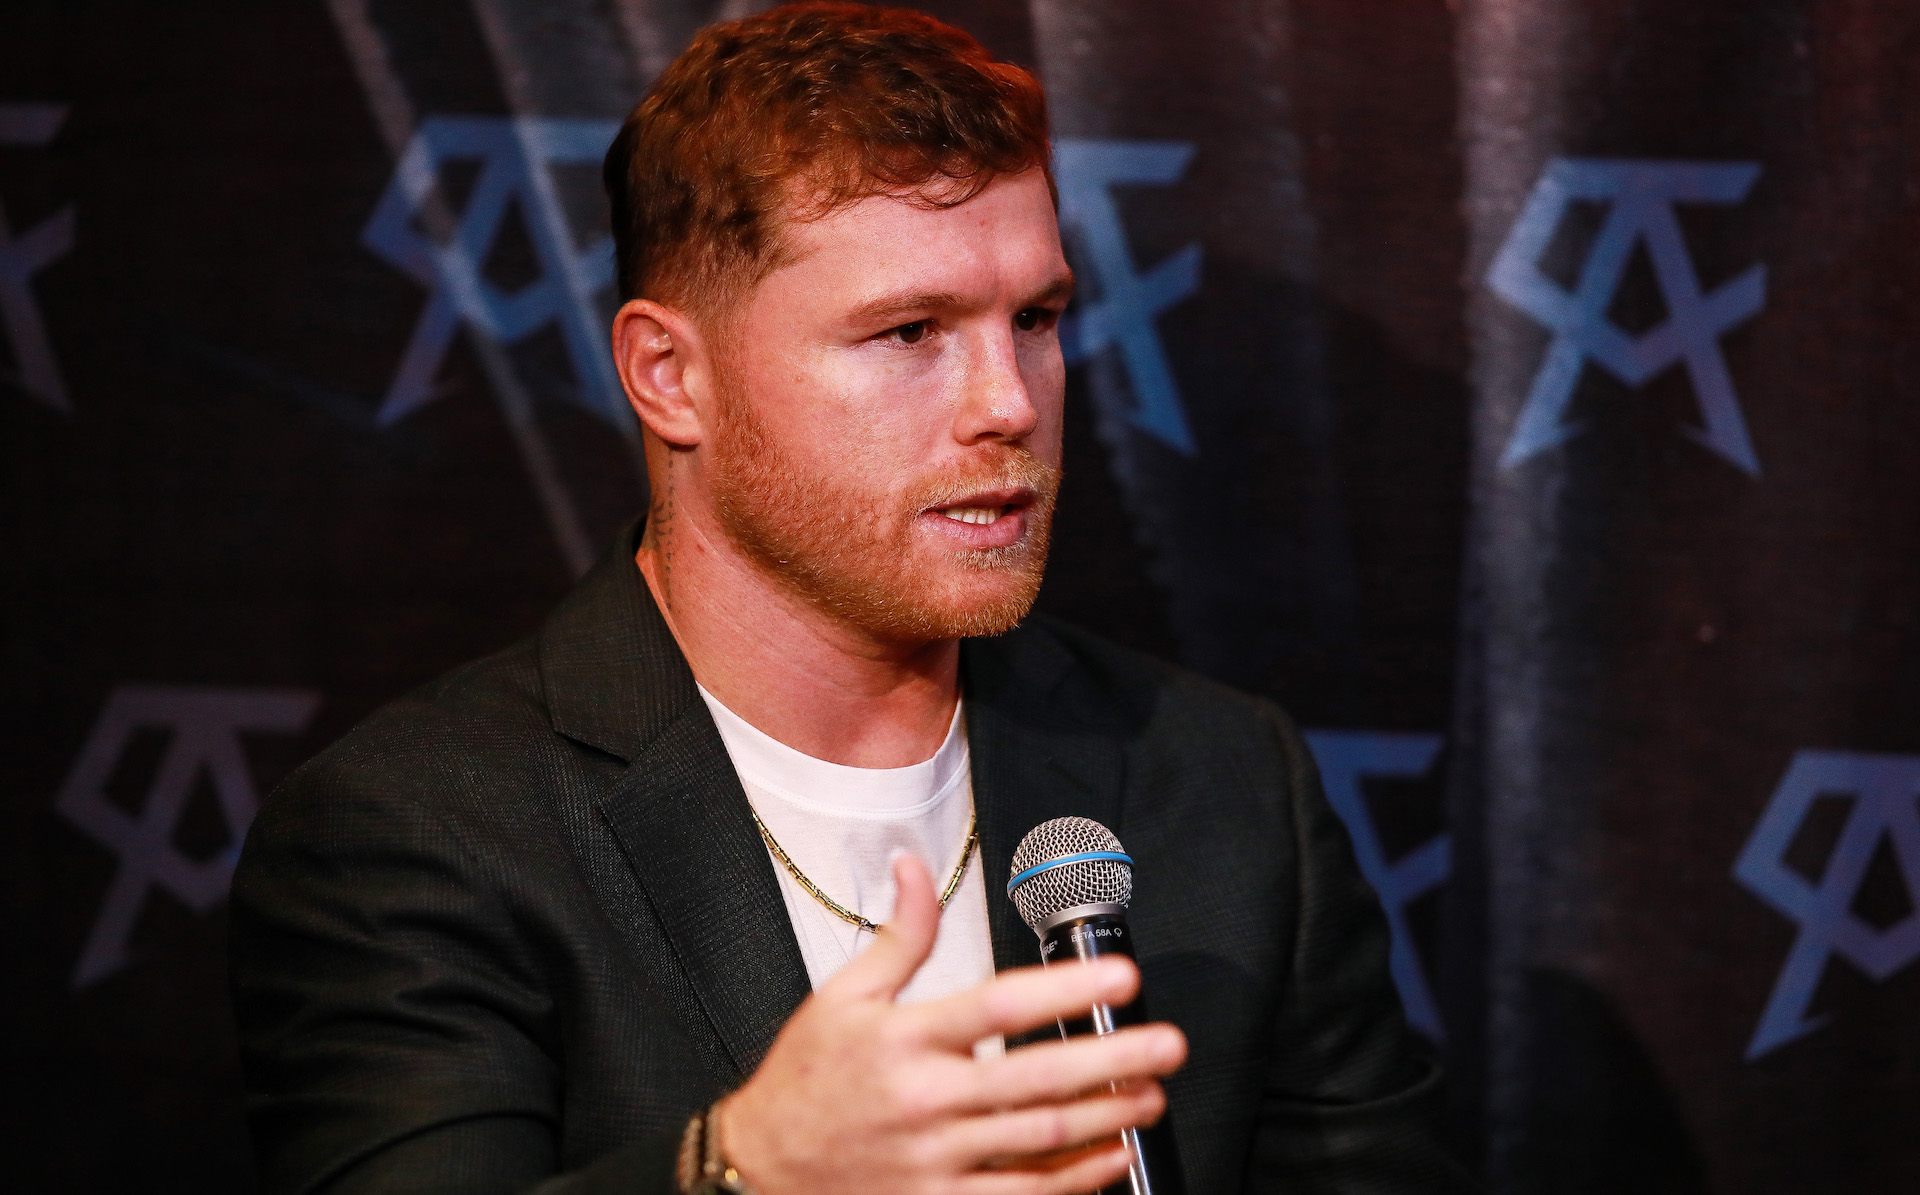 Complex Sneakers on X: Before and after @Canelo picked up the